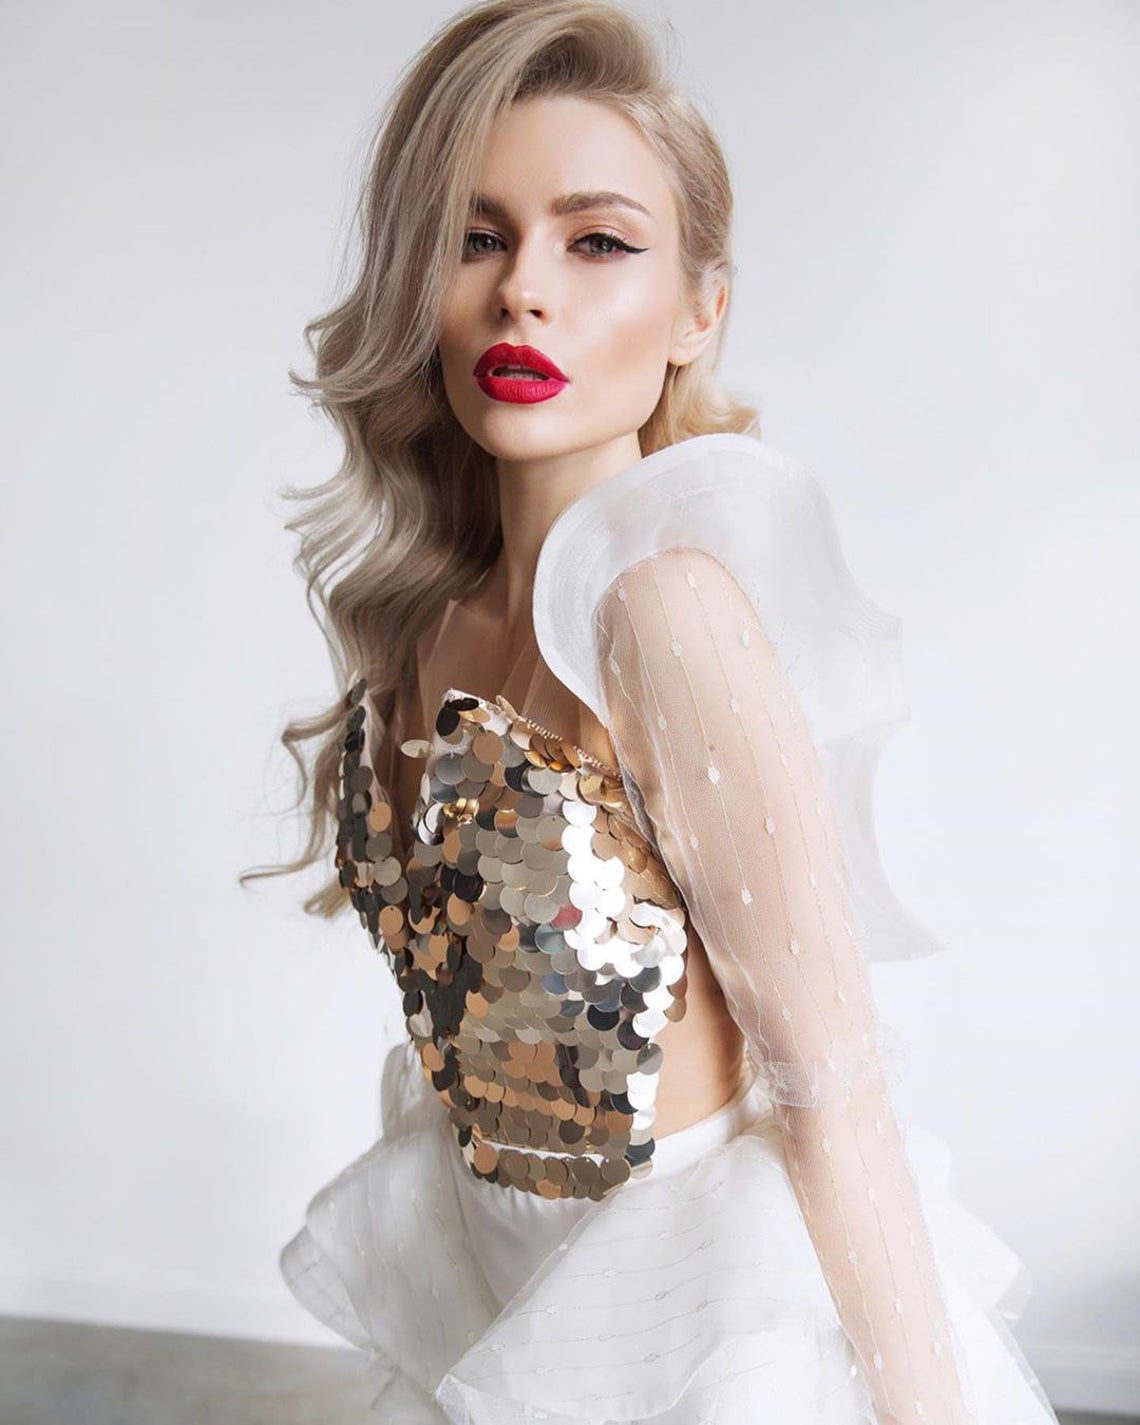 Uniuque wedding dress Crappie with the glittering bodice from Rara Avis designer available in Dell'Amore Bridal, Auckland New Zealand 2